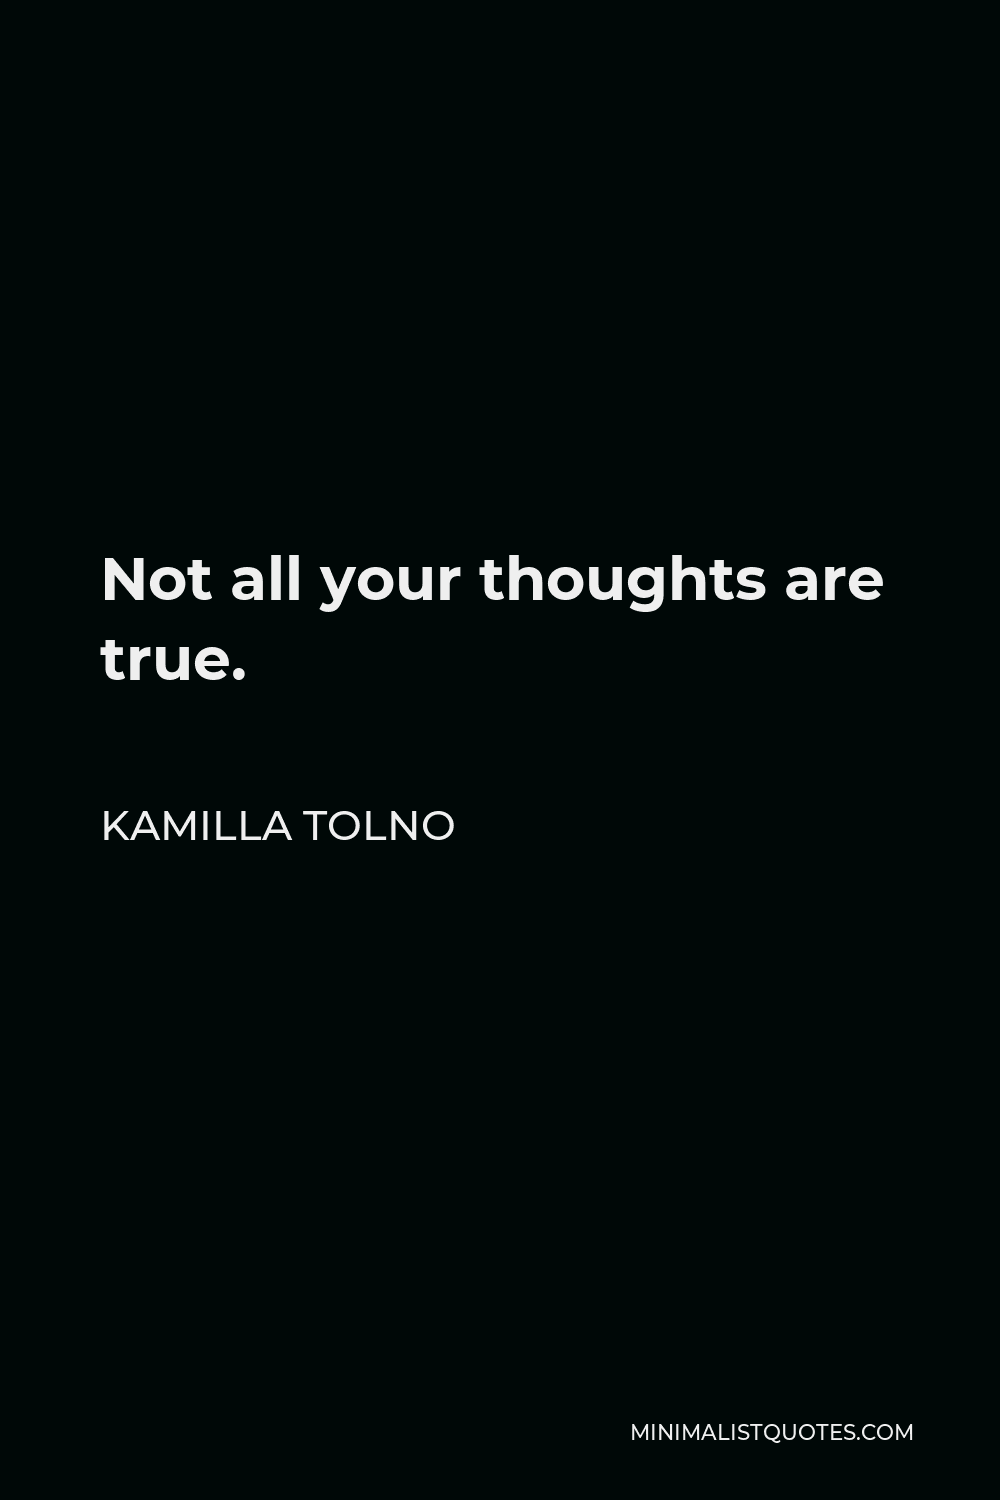 Kamilla Tolno Quote - Not all your thoughts are true.